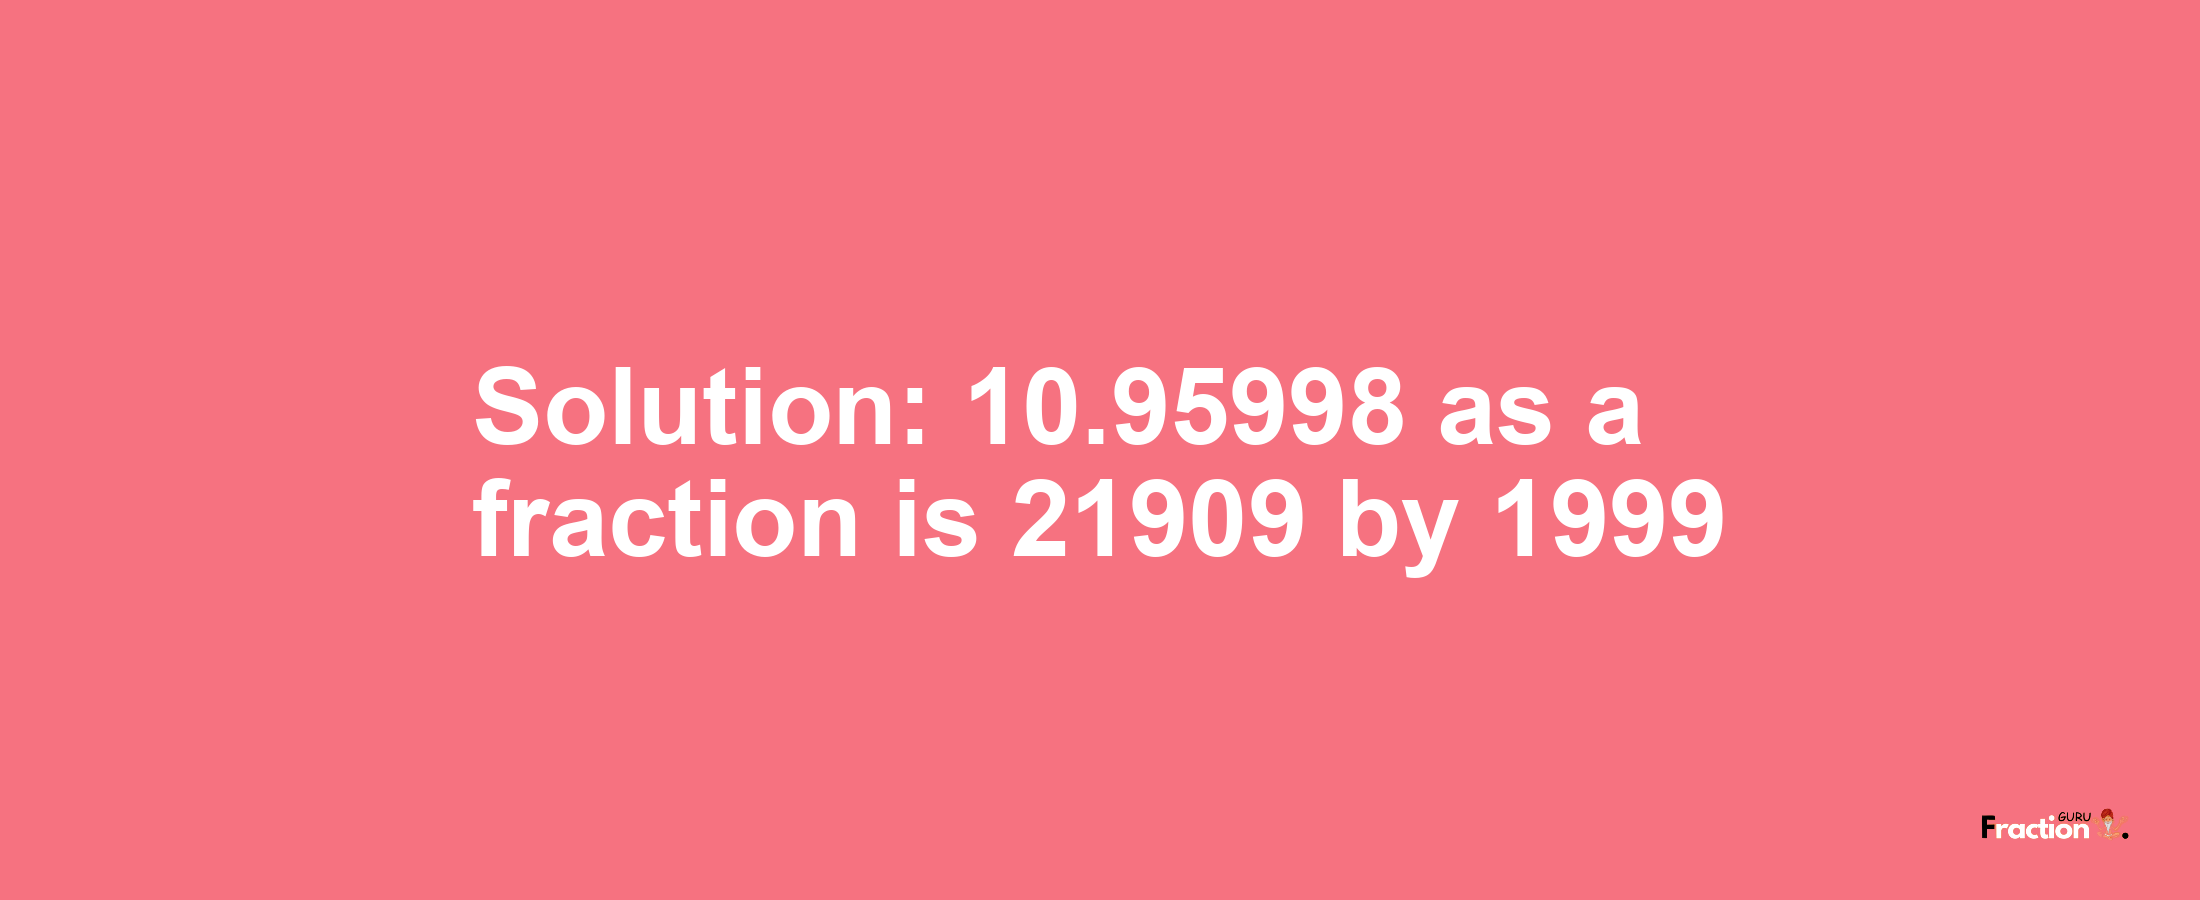 Solution:10.95998 as a fraction is 21909/1999